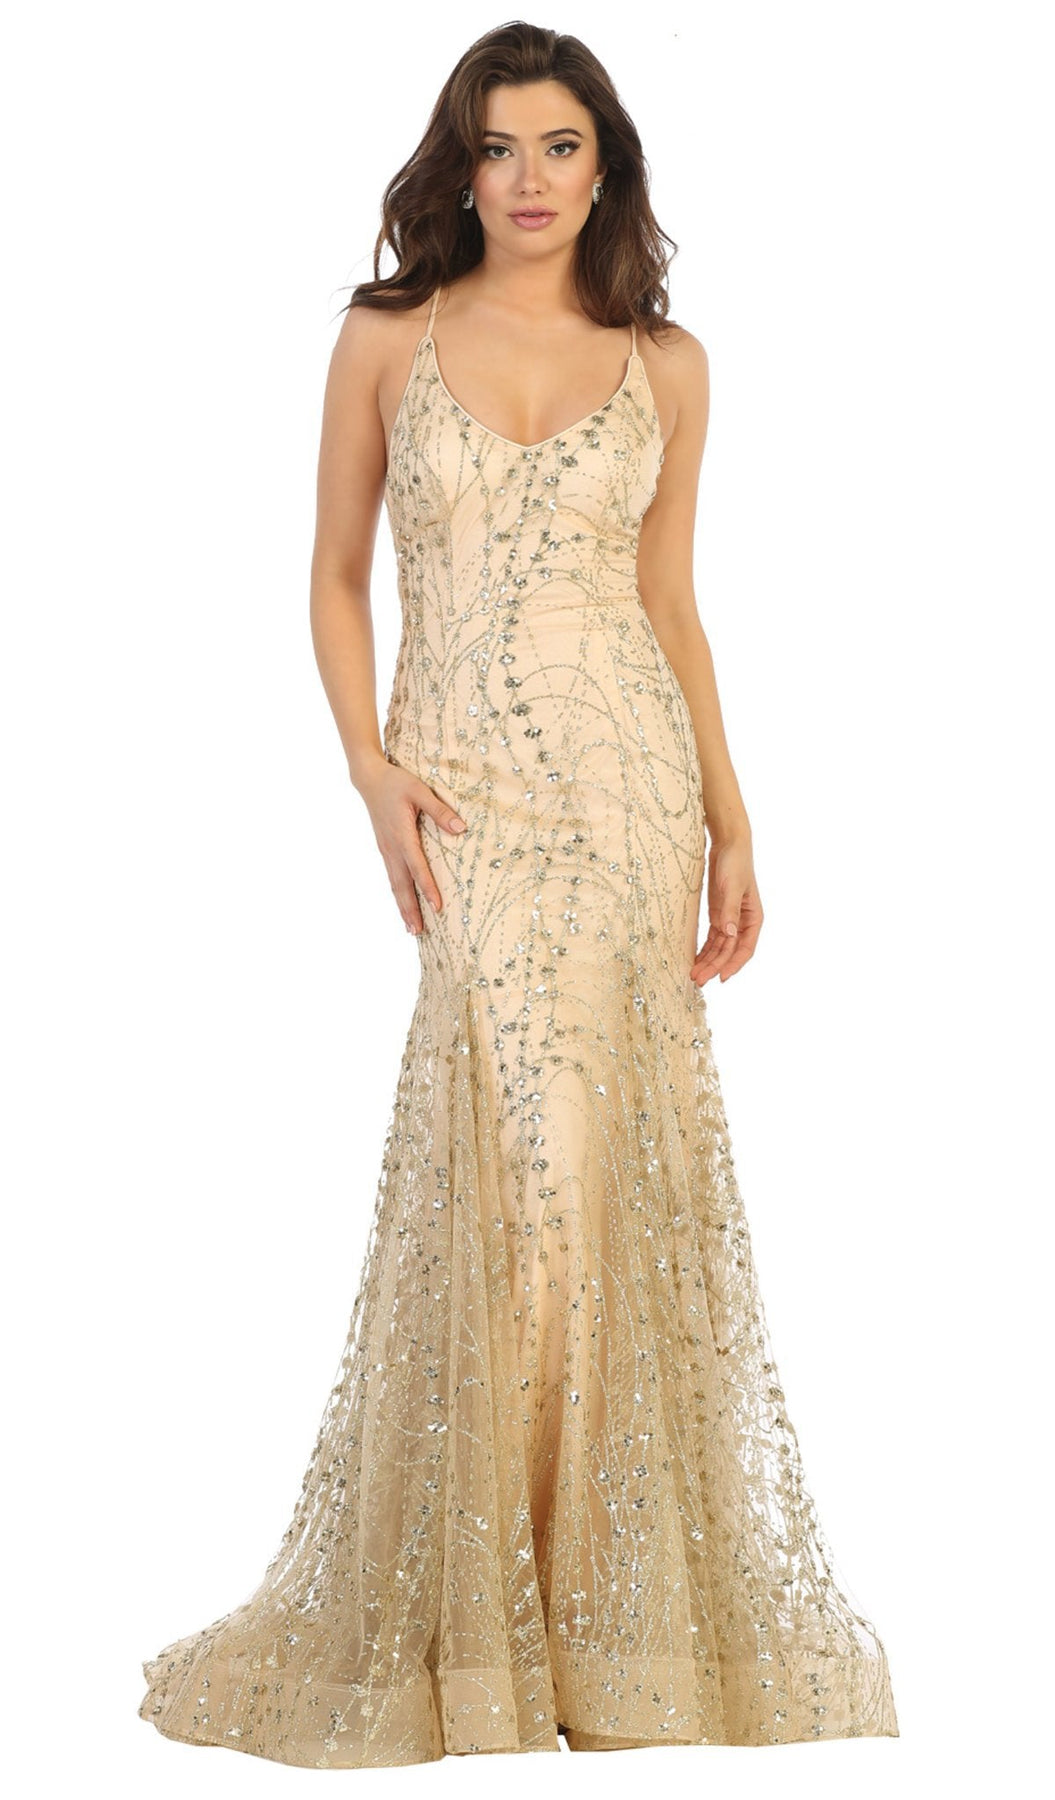 May Queen - RQ7763 Embellished Plunging V-neck Trumpet Dress Special Occasion Dress 2 / Gold